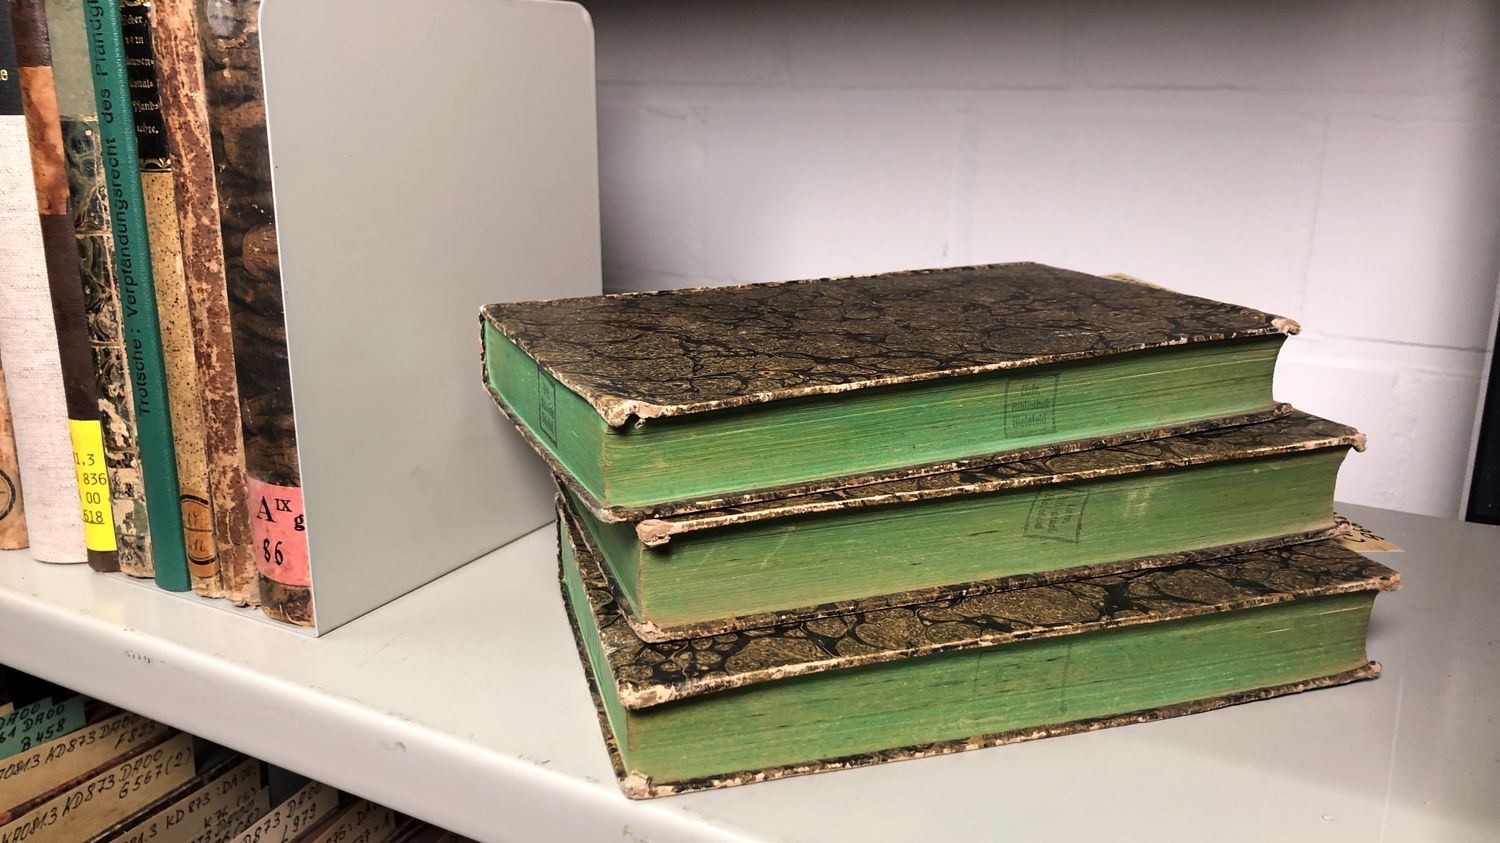 REPORTING.  'May cause discomfort, vomiting or diarrhoea': 19th-century books stained with arsenic removed from German libraries